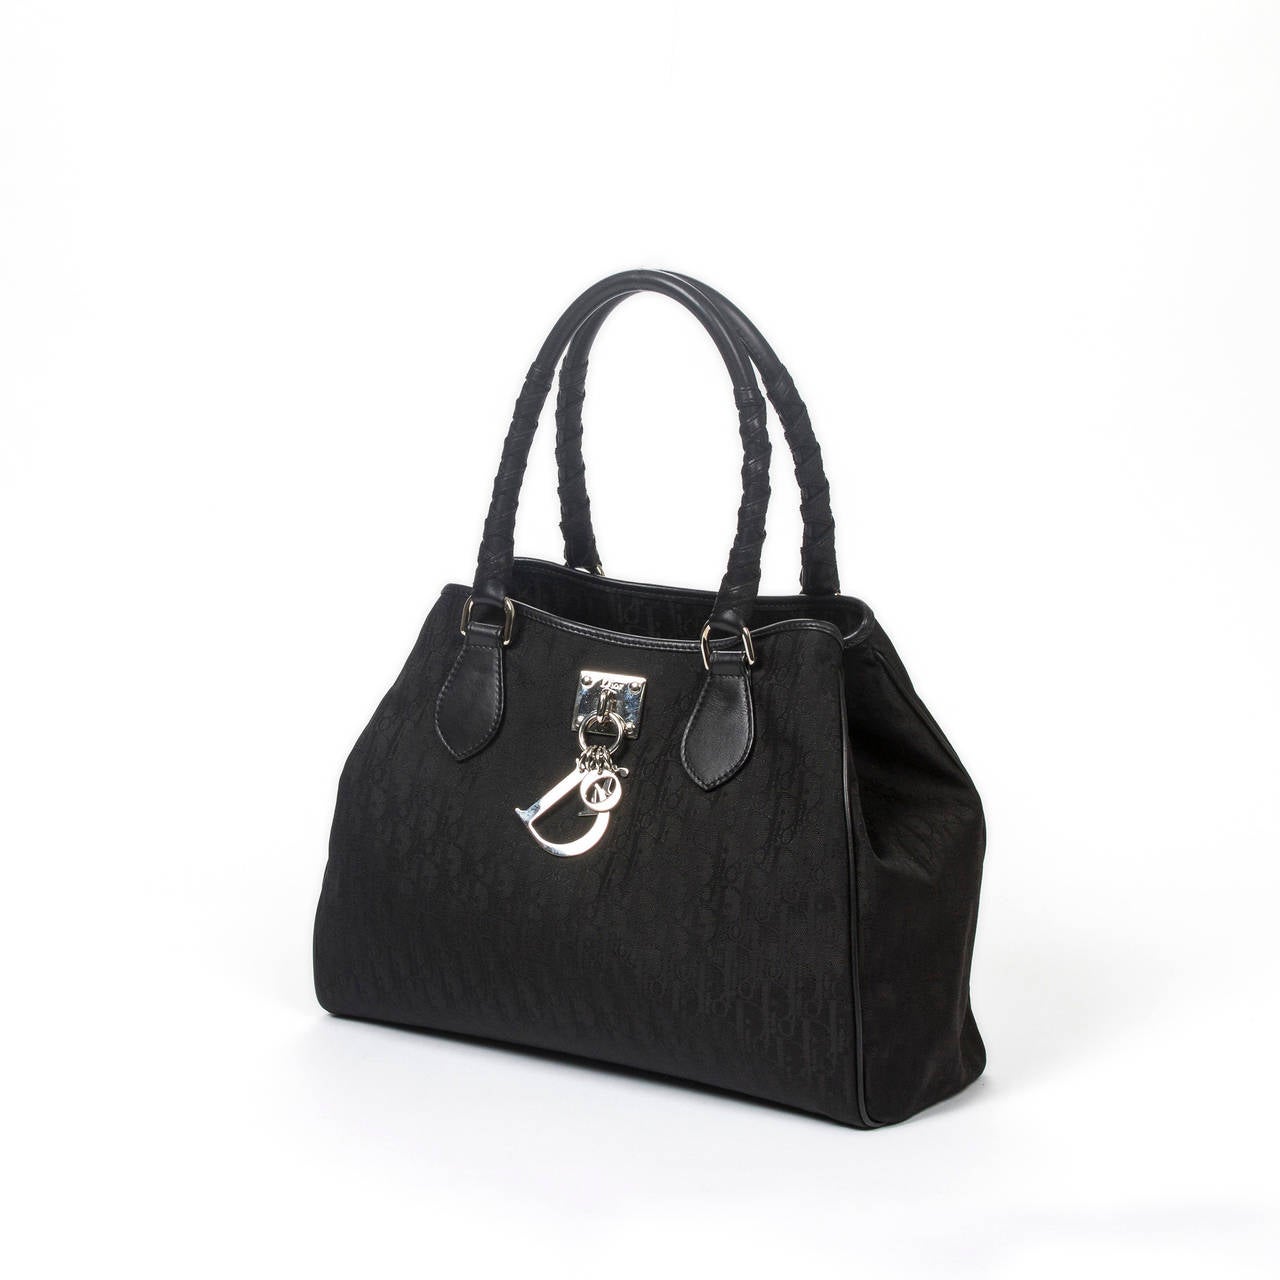 Dior Vintage handbag in black monogram canvas. Handles in black leather. Silver tone hardware with Dior in silver letters charm. Lined interior in black canvas with one zip pockets and 2 slip pockets. Perfect condition.